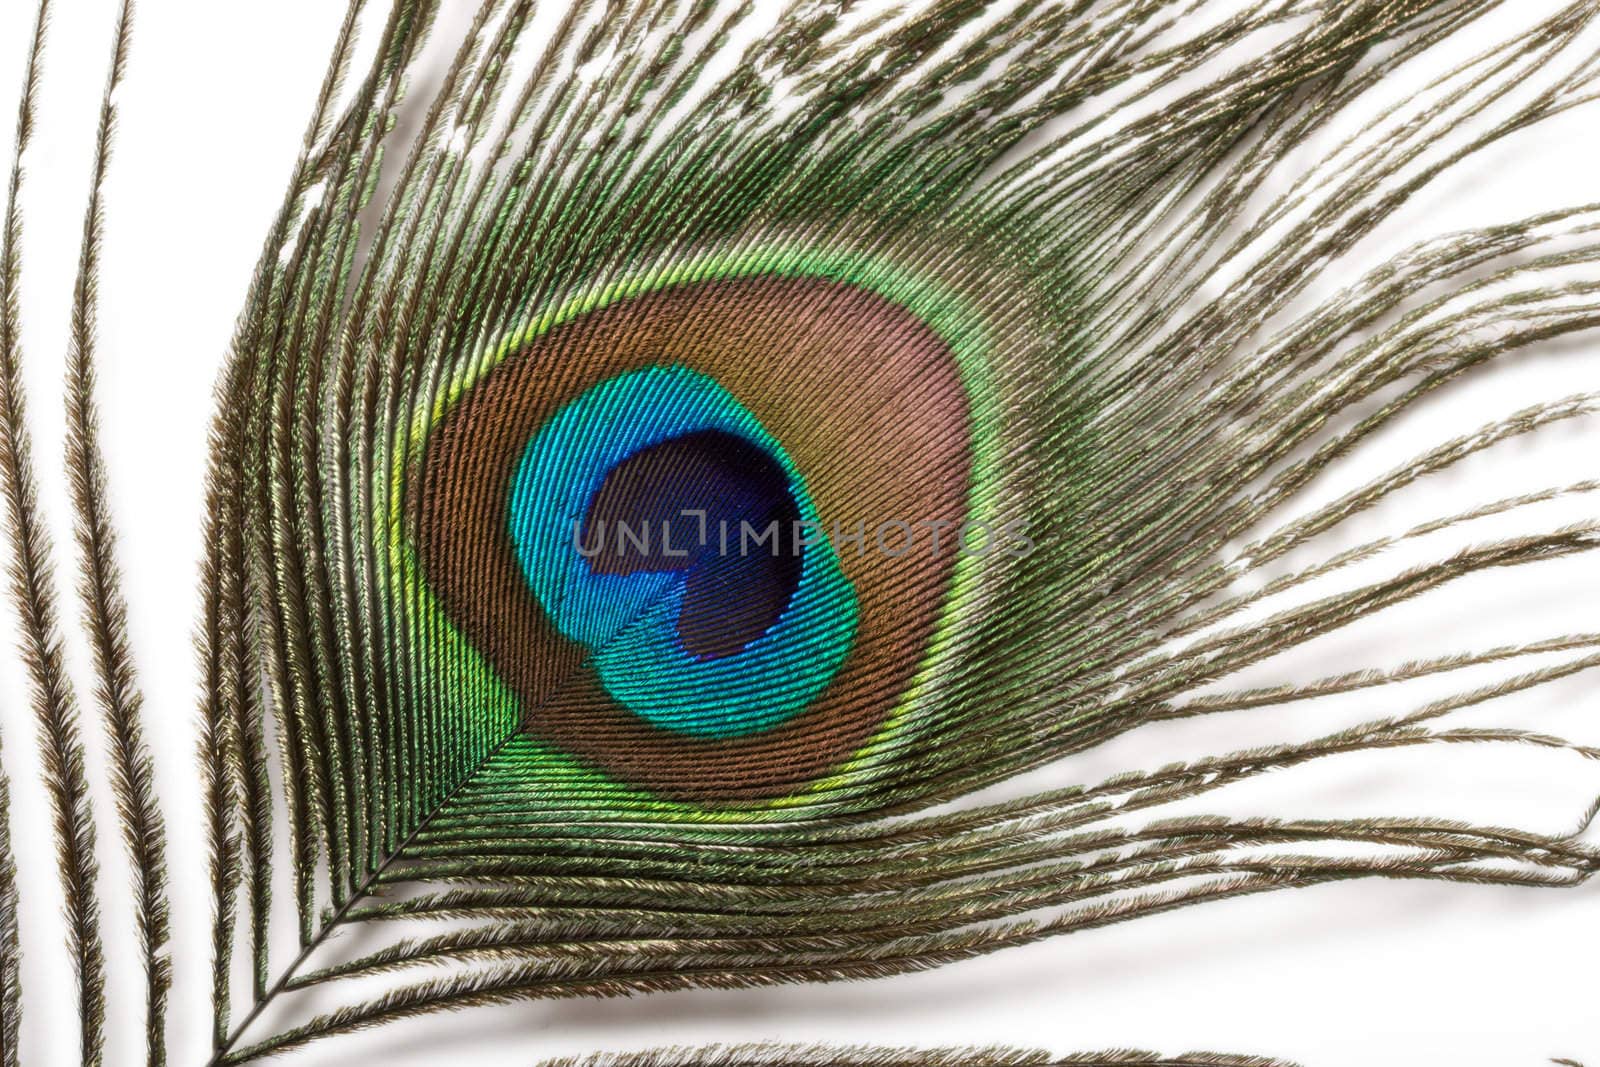 Peacock feather close up by dimol